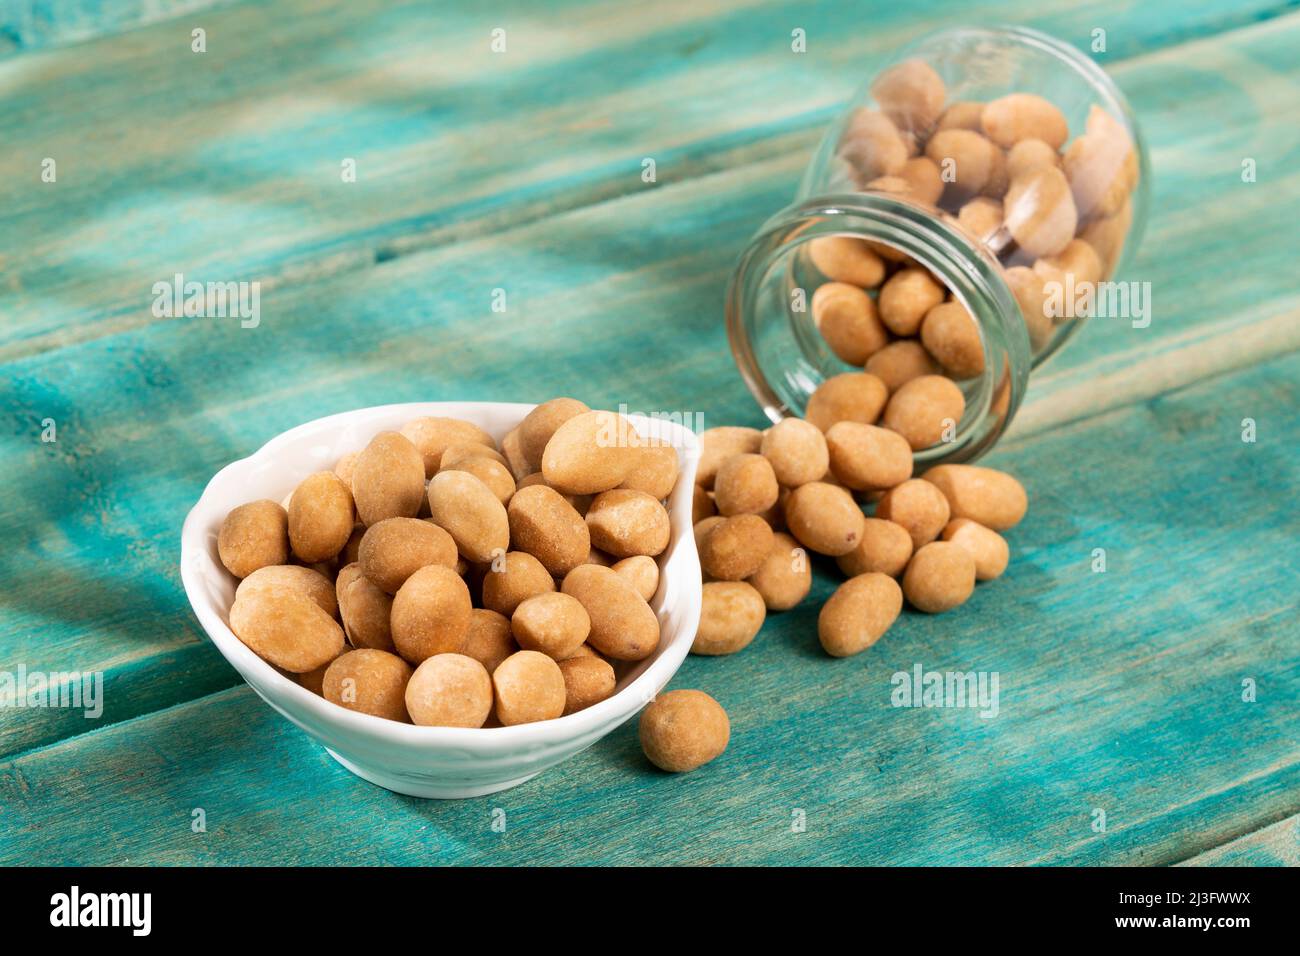 Tasty Peanuts Covered With A Crunchy Layer Of Wheat Flour Stock Photo